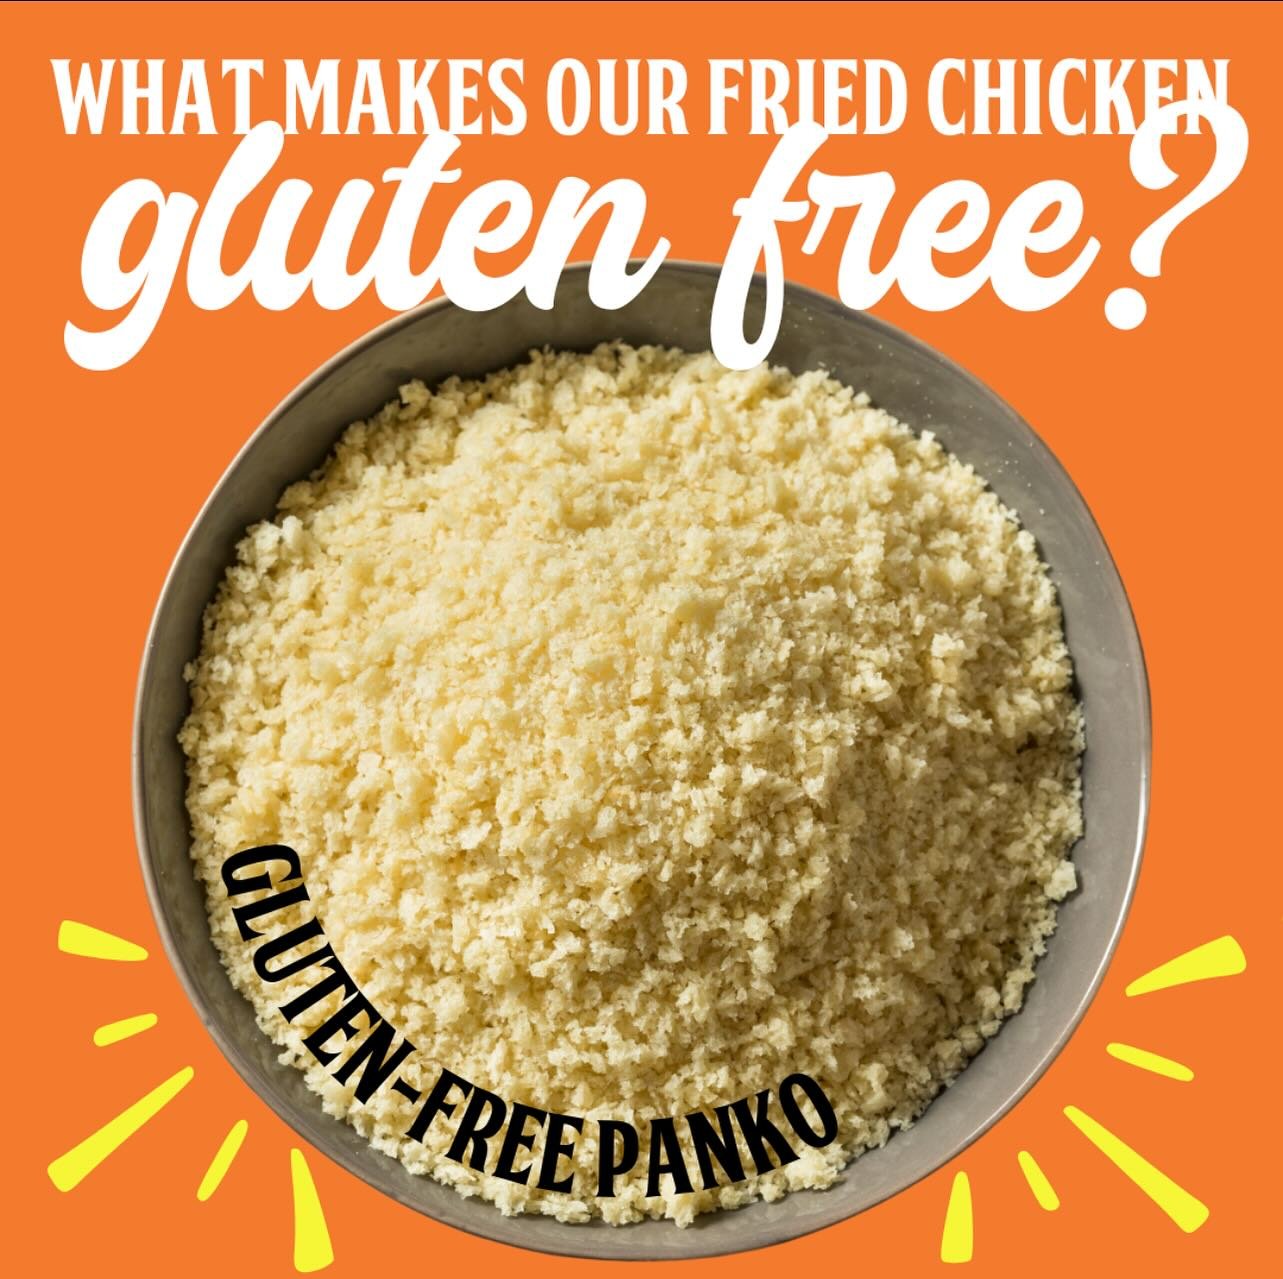 We take your food allergies serious , our fryer is dedicated gluten free and we offer a gluten free bun option for all sandwiches.  Make sure to tell us your allergies prior to ordering 😋😋